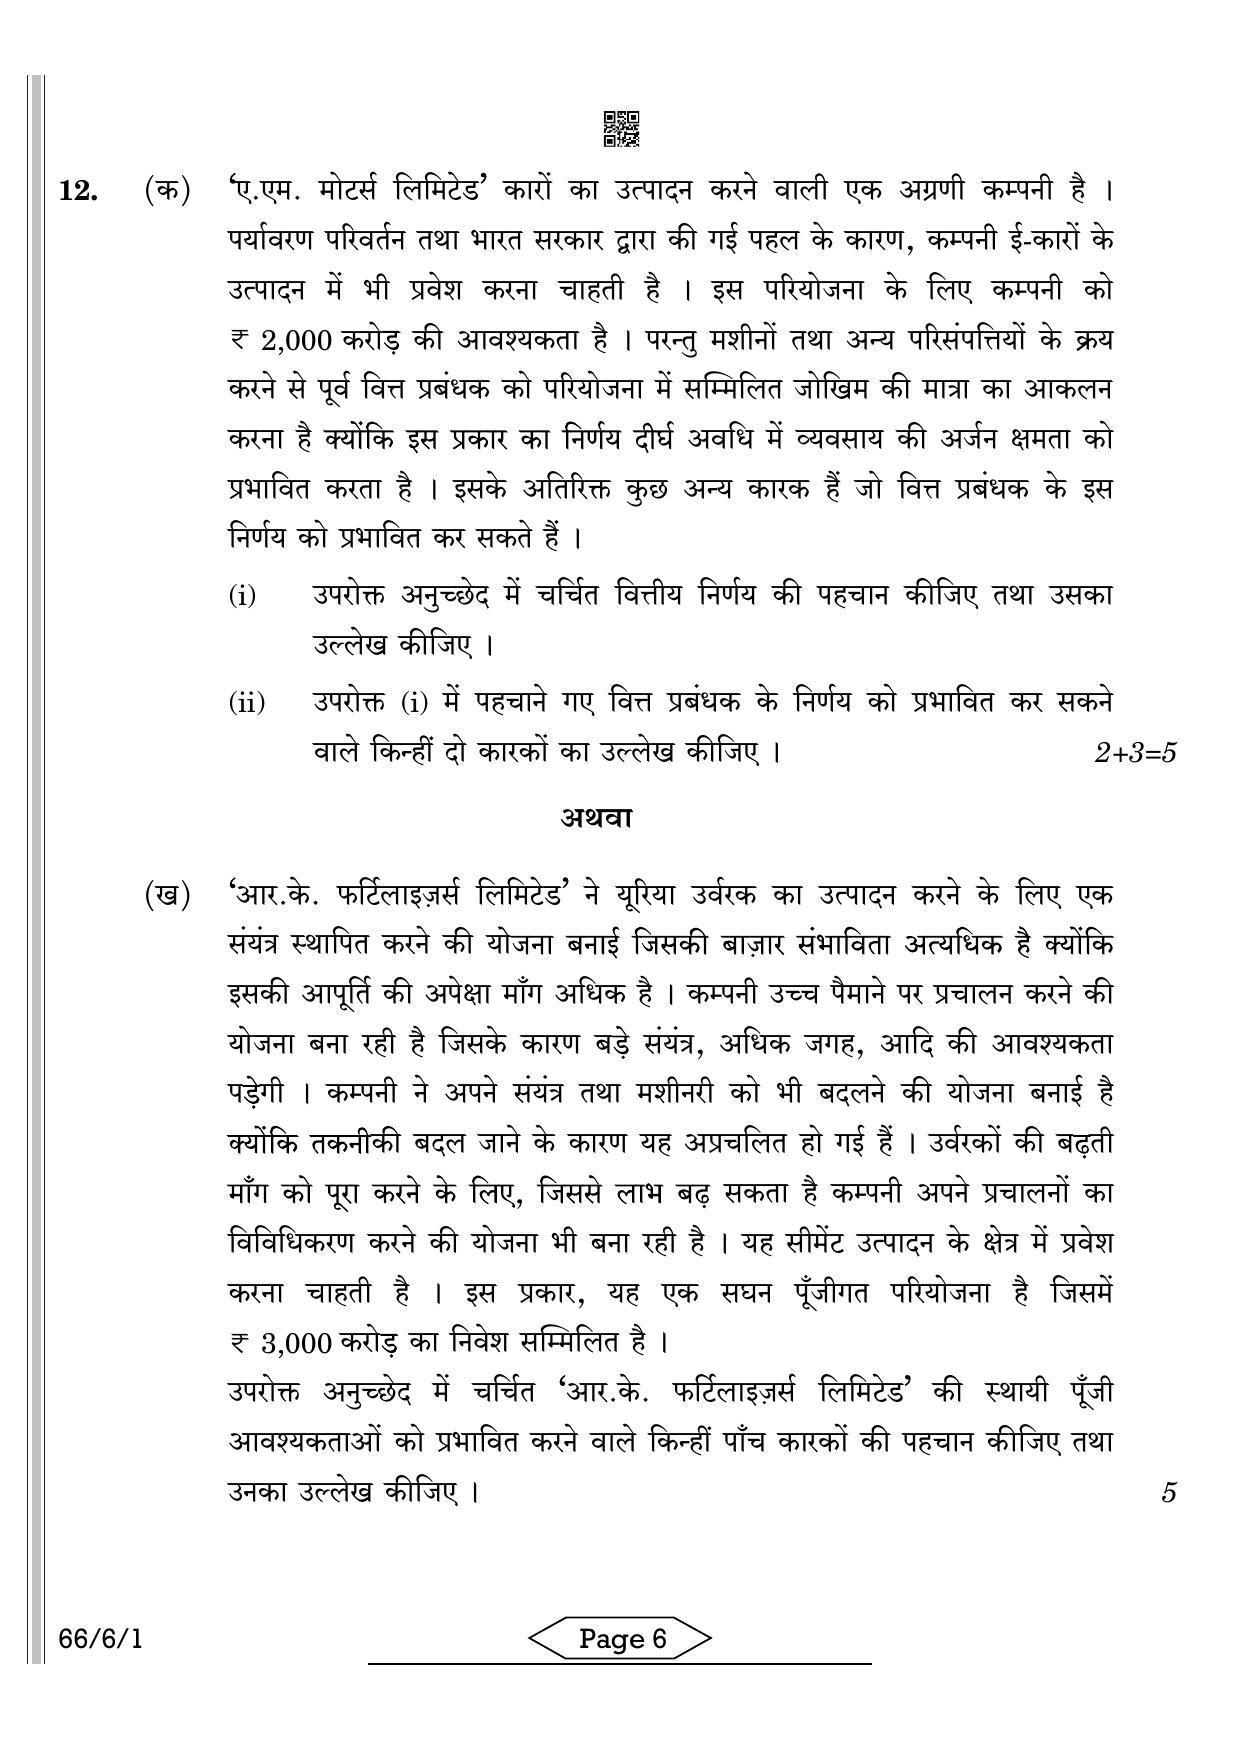 CBSE Class 12 66-6-1 BST 2022 Compartment Question Paper - Page 6